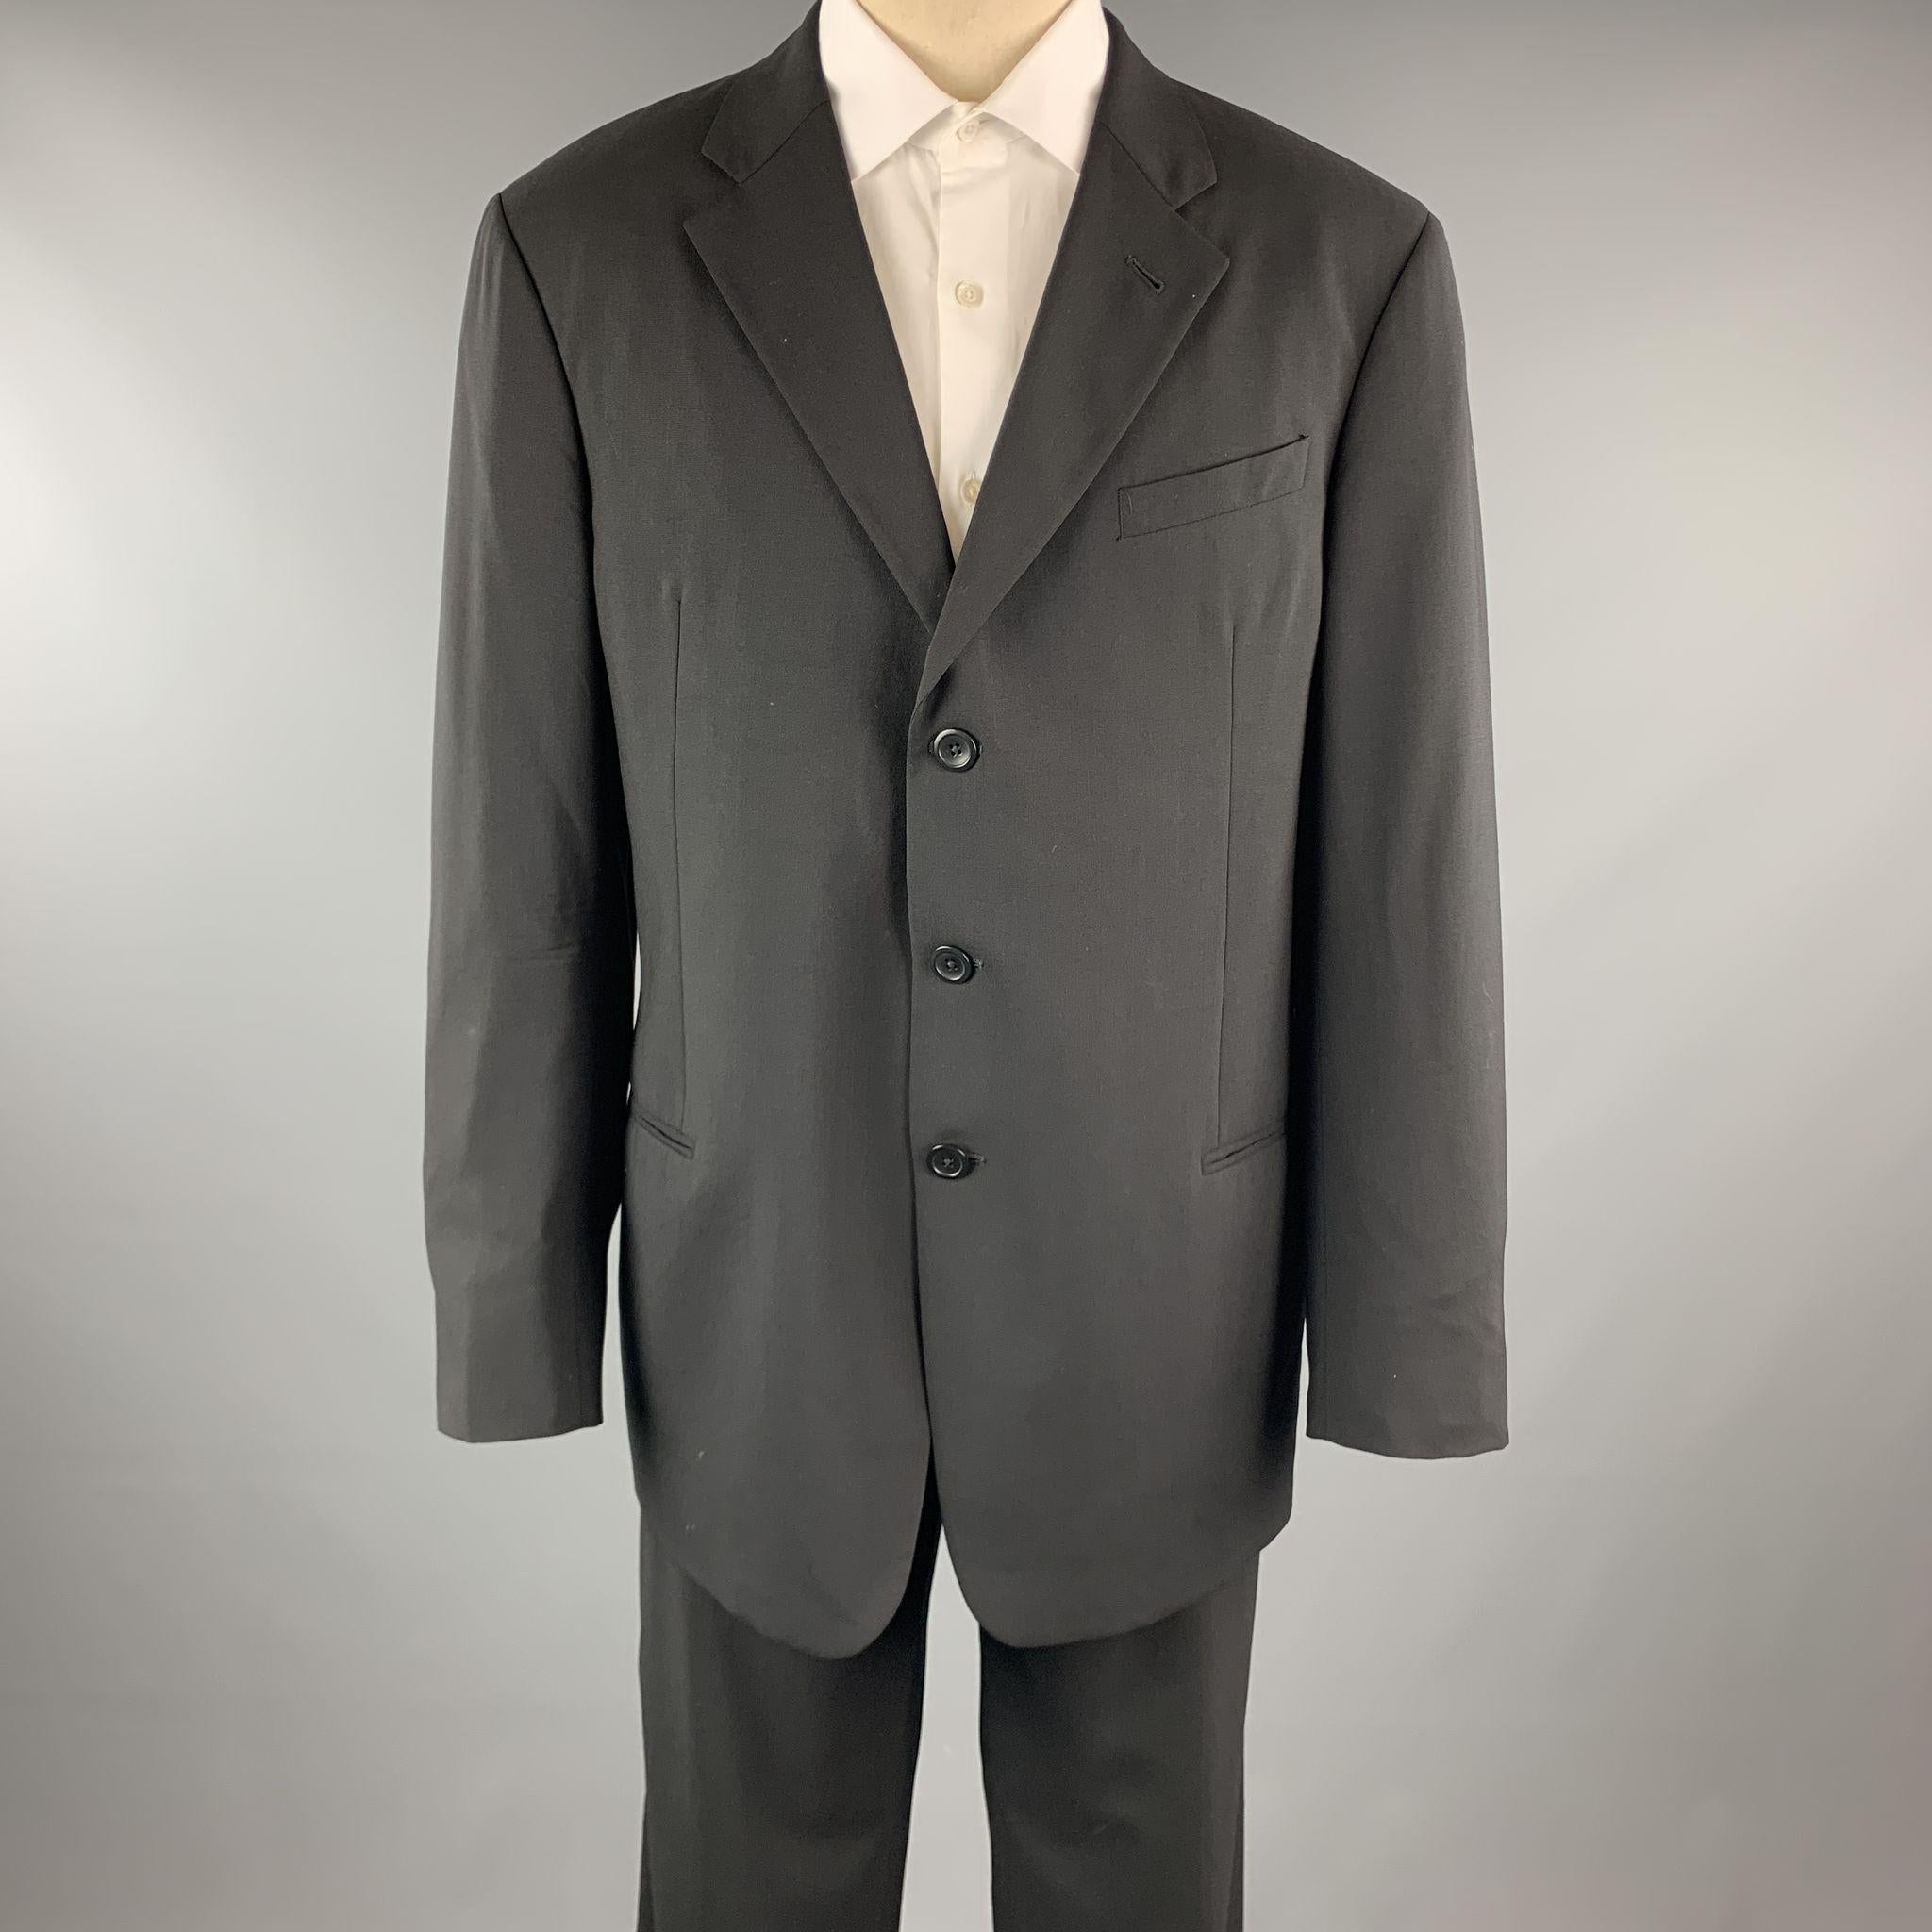 ARMANI COLLEZIONI suit comes in a black wool and includes a single breasted, three button sport coat with a notch lapel and matching front trousers. Made in Italy.

Excellent Pre-Owned Condition.
Marked: 55

Measurements:

-Jacket
Shoulder: 19.5 in.